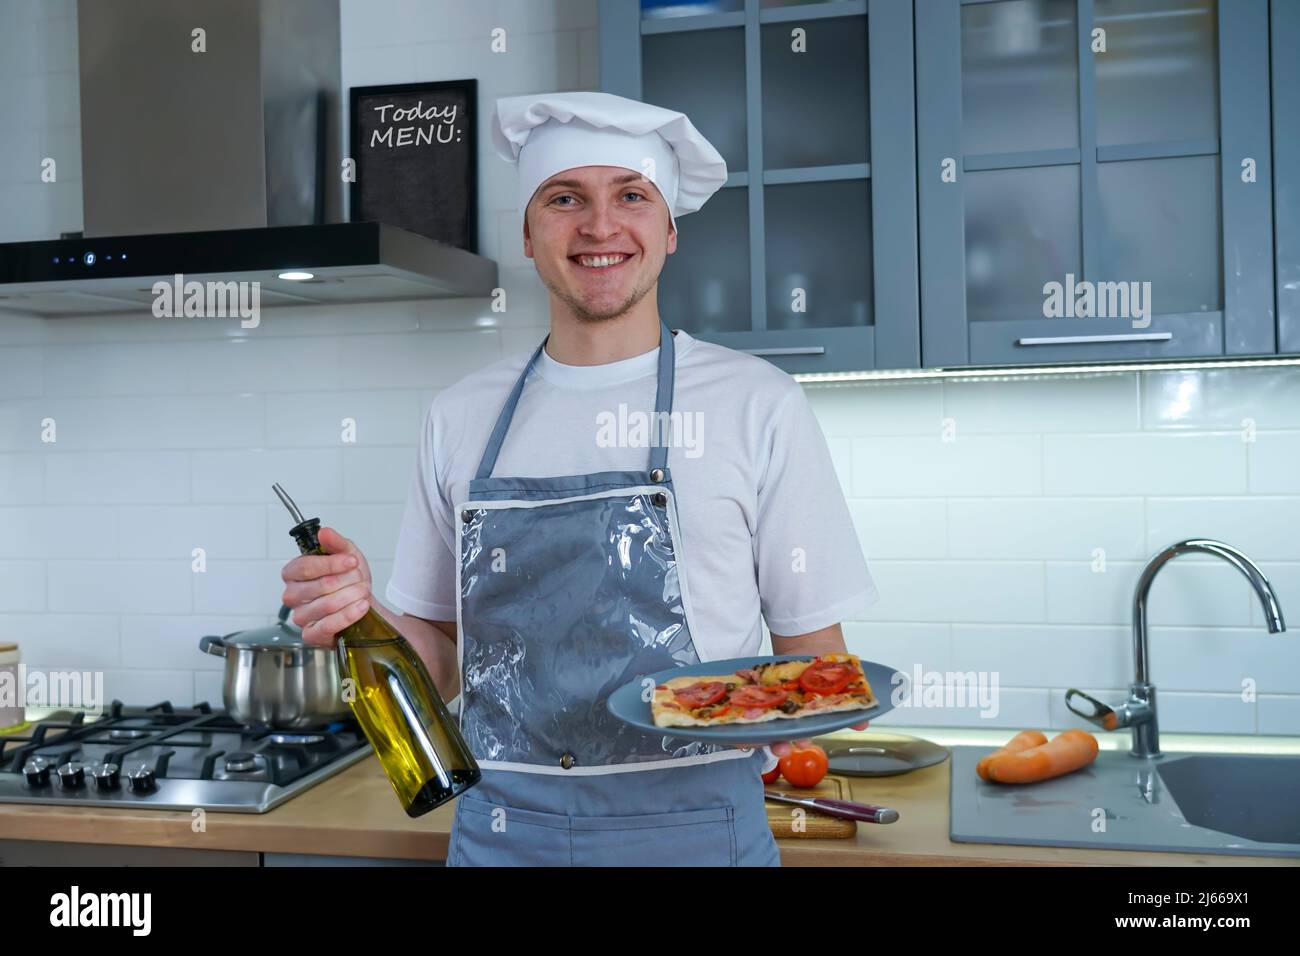 Portrait of a professional chef in the kitchen. He is holding a cooked pizza and a bottle of olive oil in his hands. Stock Photo